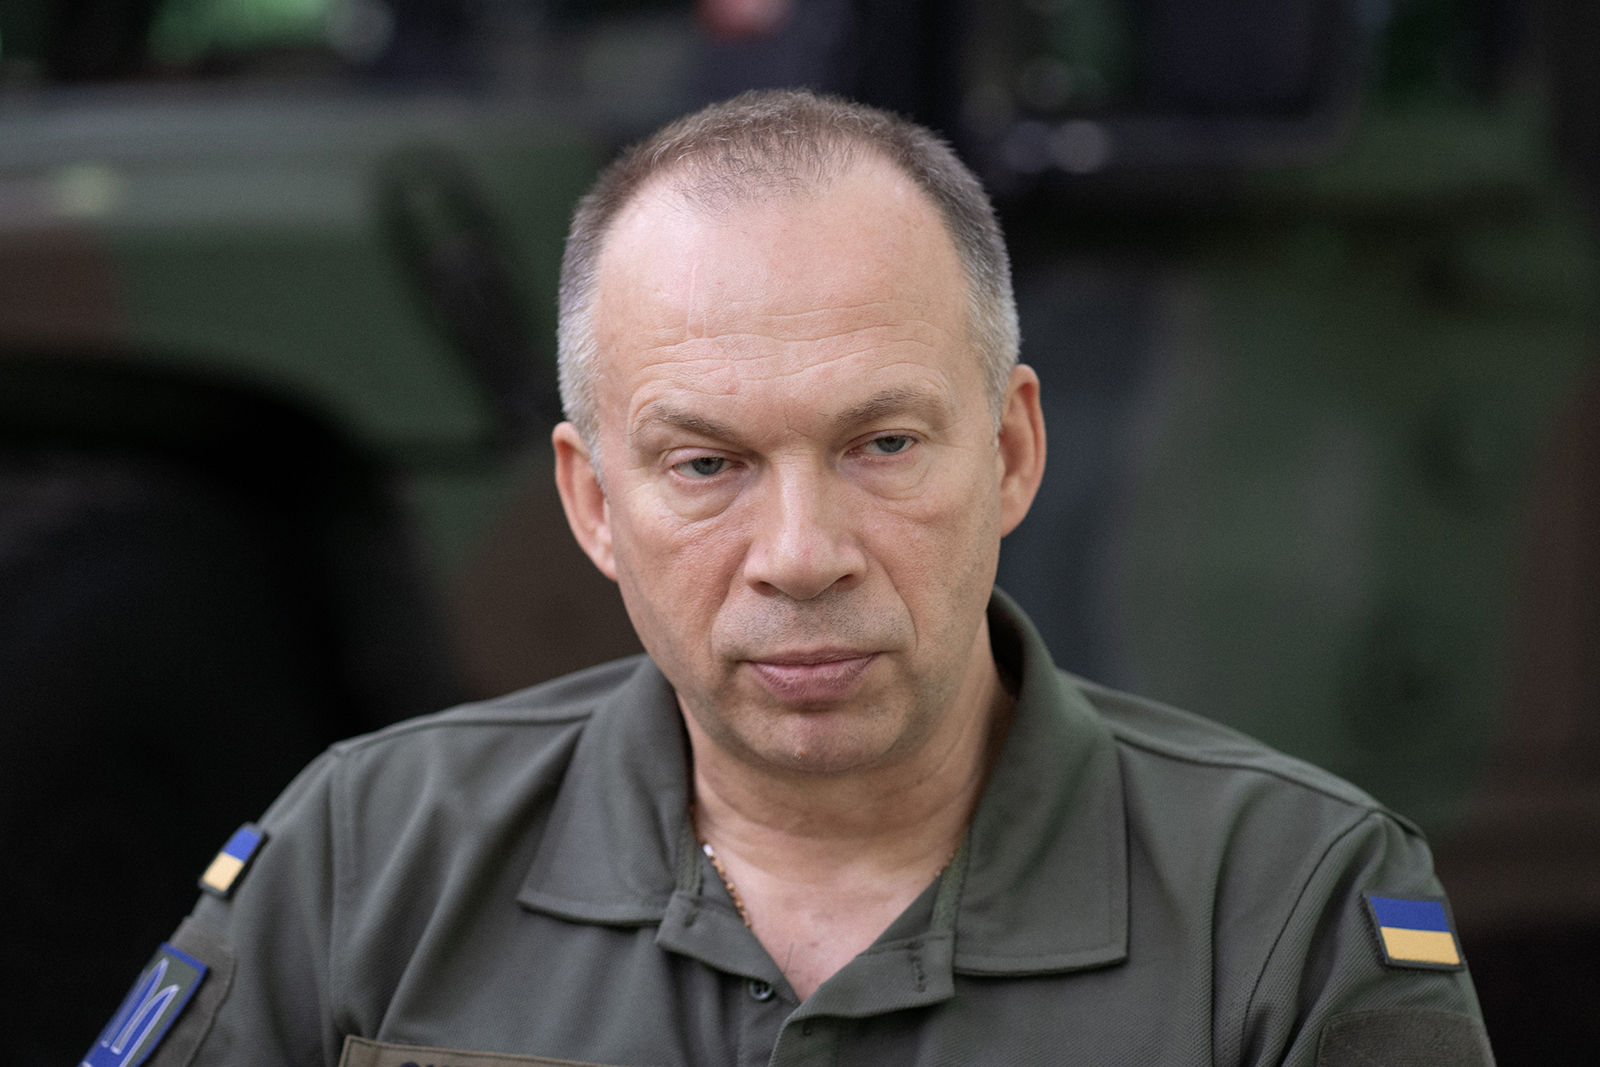 Oleksandr Syrsky photographed during an interview on June 30, 2022 in eastern Ukraine. (Anastasia Vlasova for The Washington Post via Getty Images)